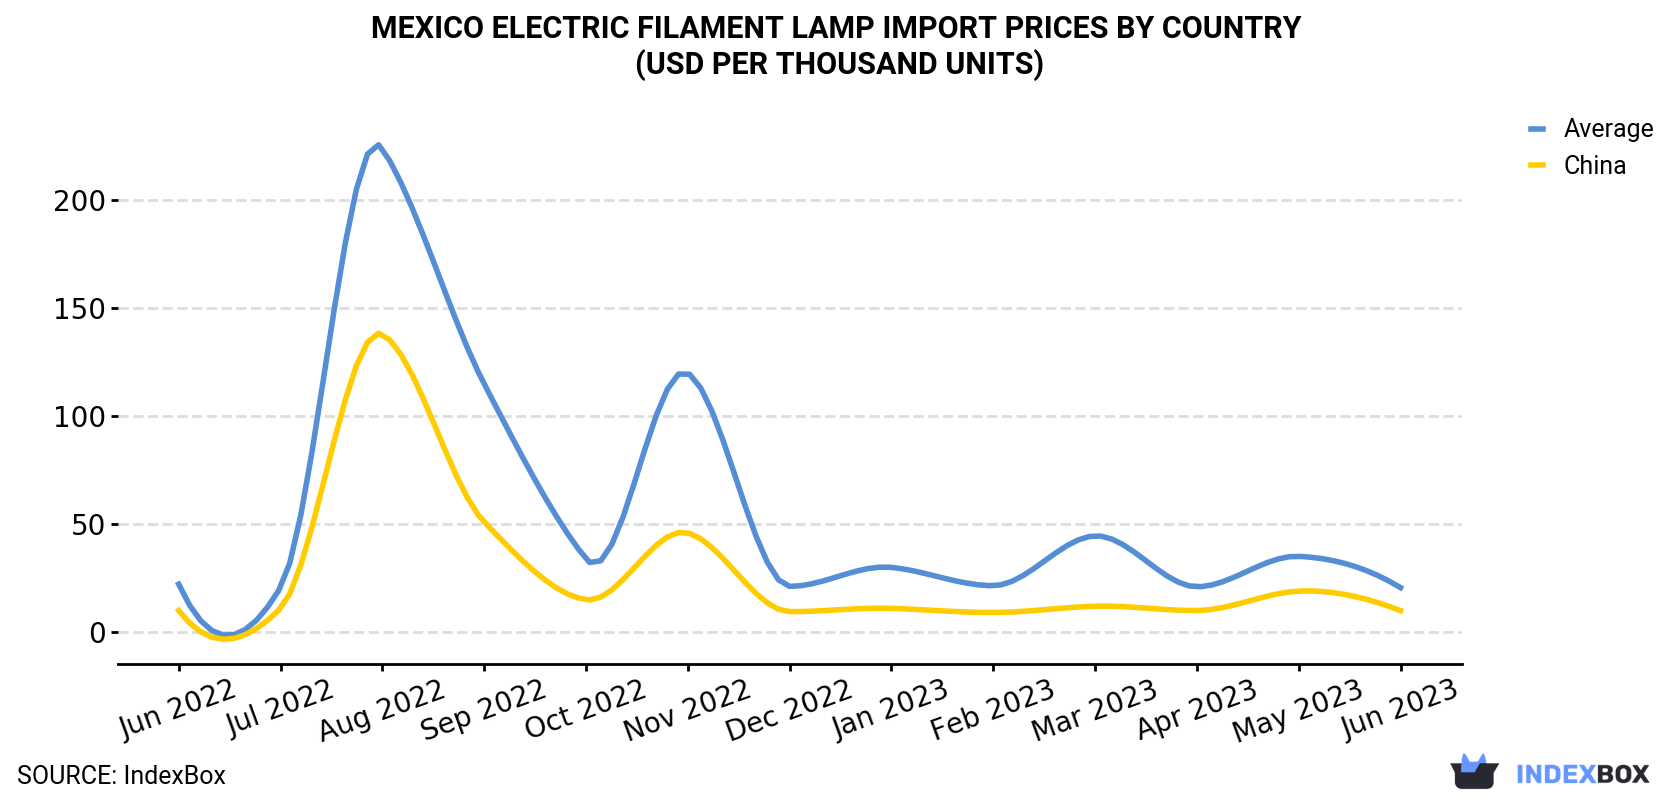 Mexico Electric Filament Lamp Import Prices By Country (USD Per Thousand Units)